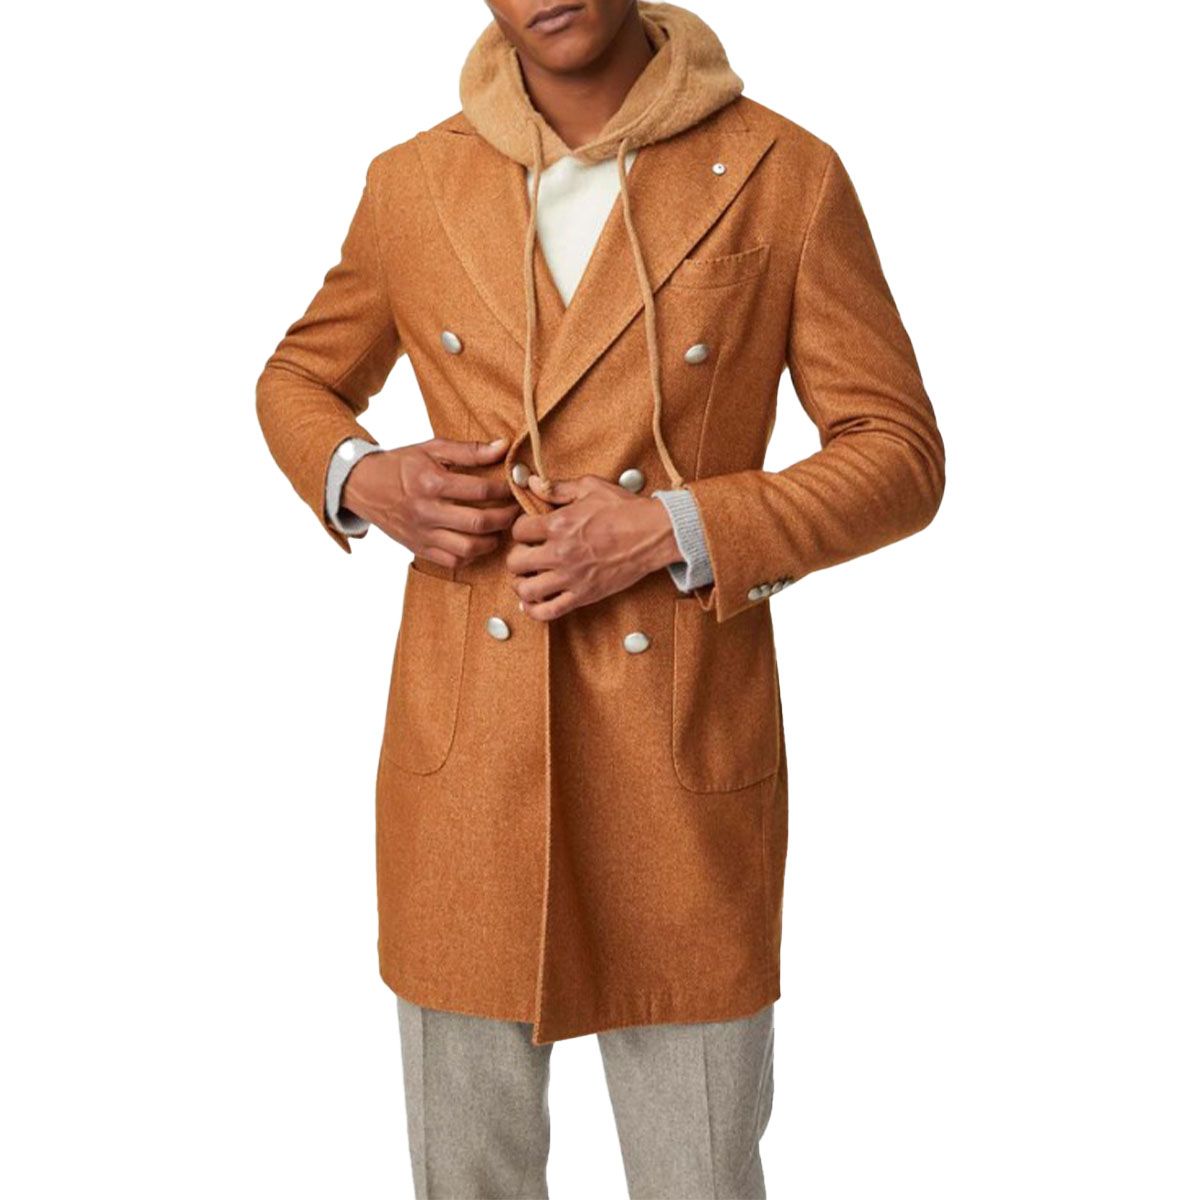 Double Breasted Tobacco Coat